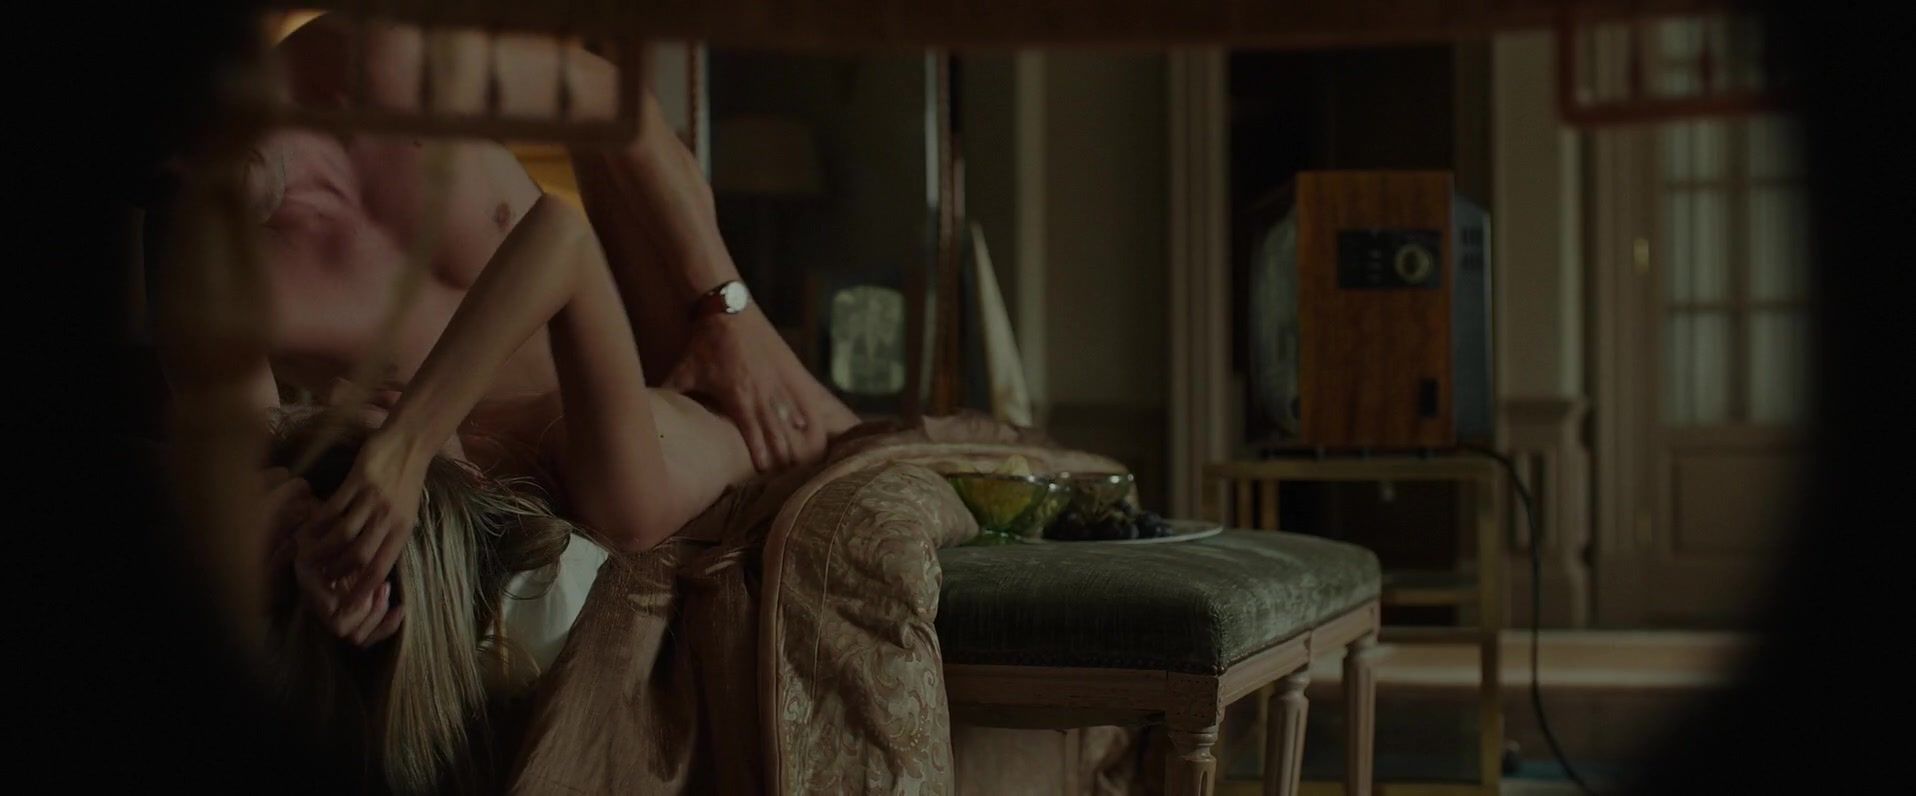 Strange Hot scene with nude actress Melanie Laurent of the movie "By The Sea" Close Up